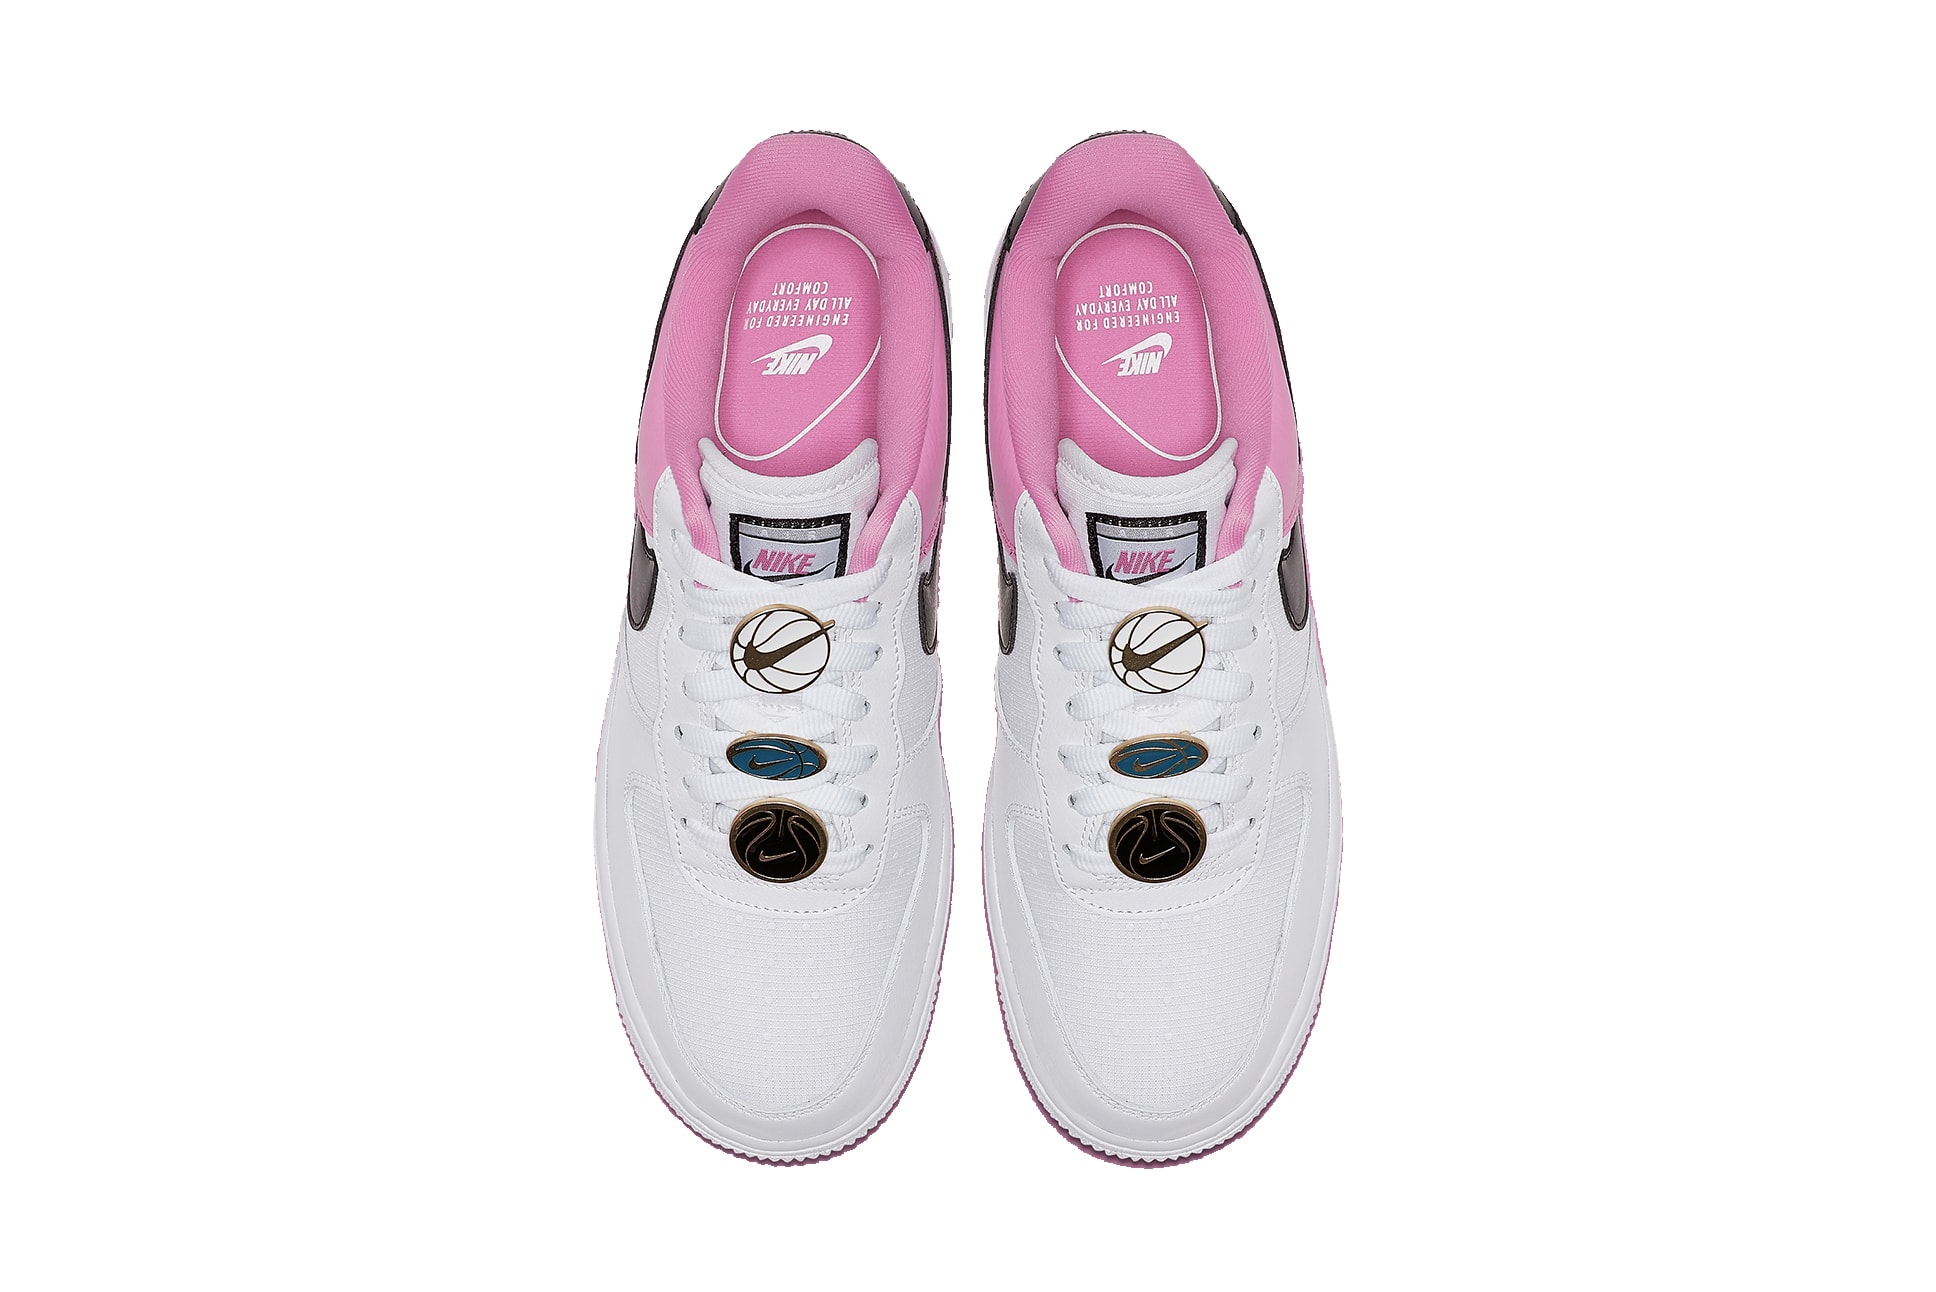 Nike Air Force 1 Sneaker Trainer "China Rose" Lacelocks Pink White Black Swoosh Shoe Footwear Releases Where To Buy Air Force 1 Sneaker